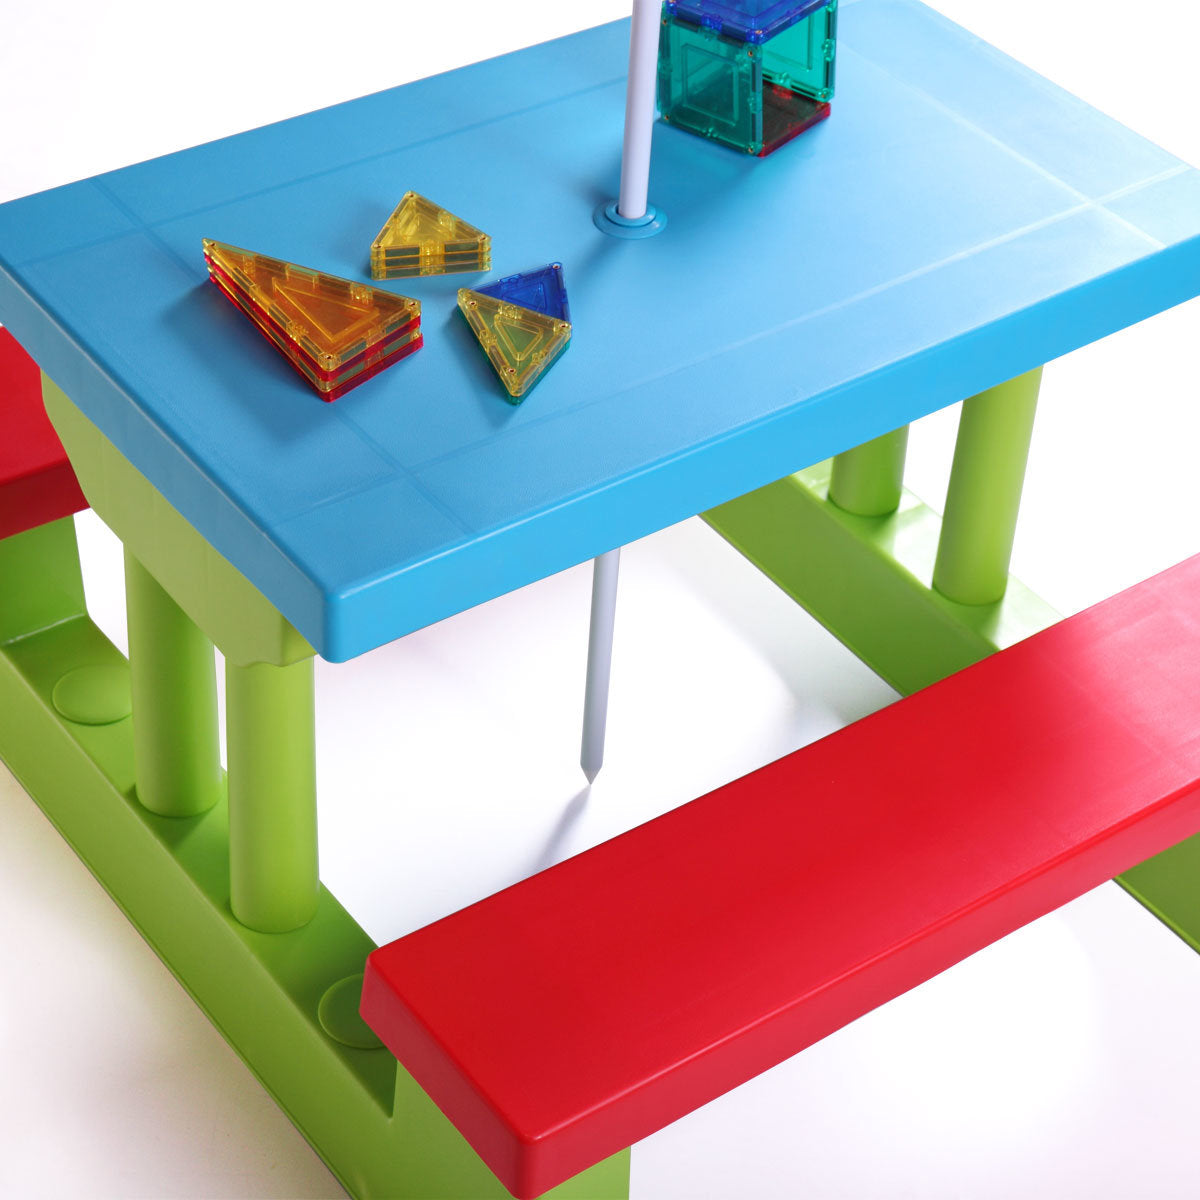 Kid Outdoor Picnic Table Set